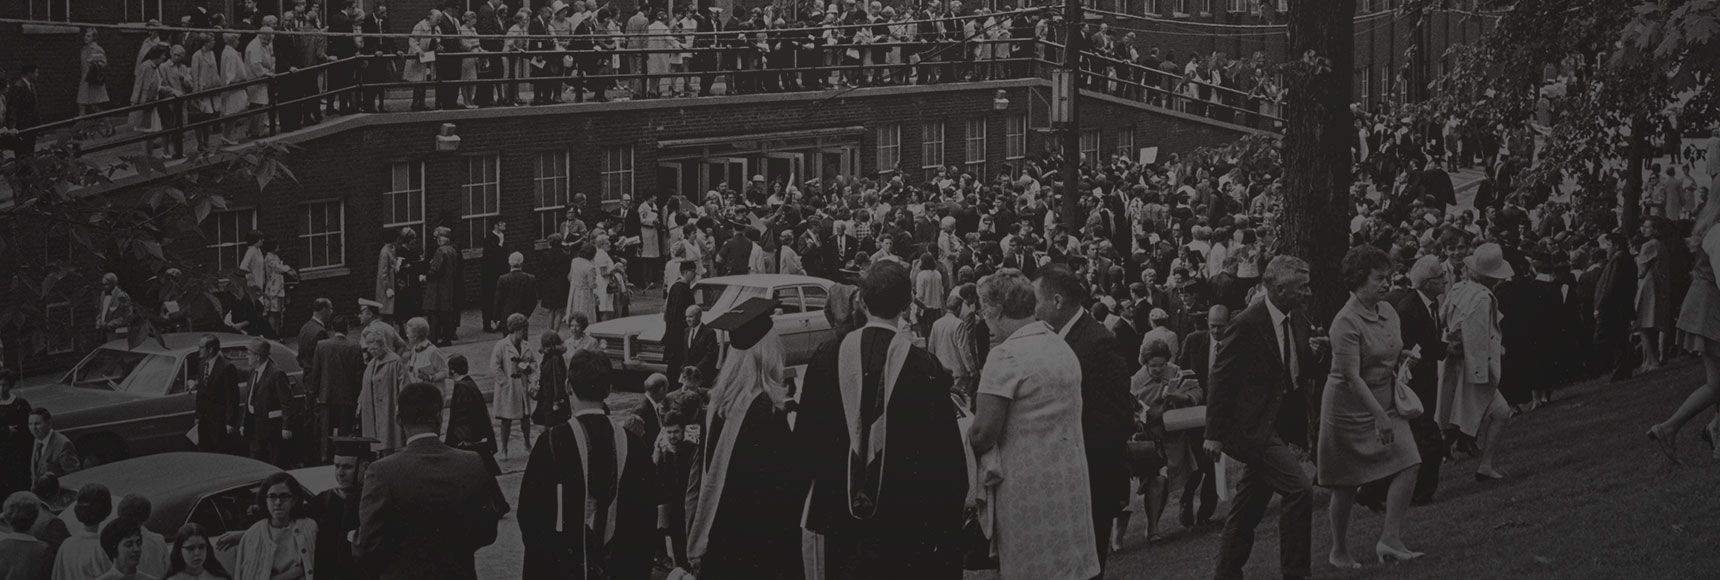 commencement in the 1960s